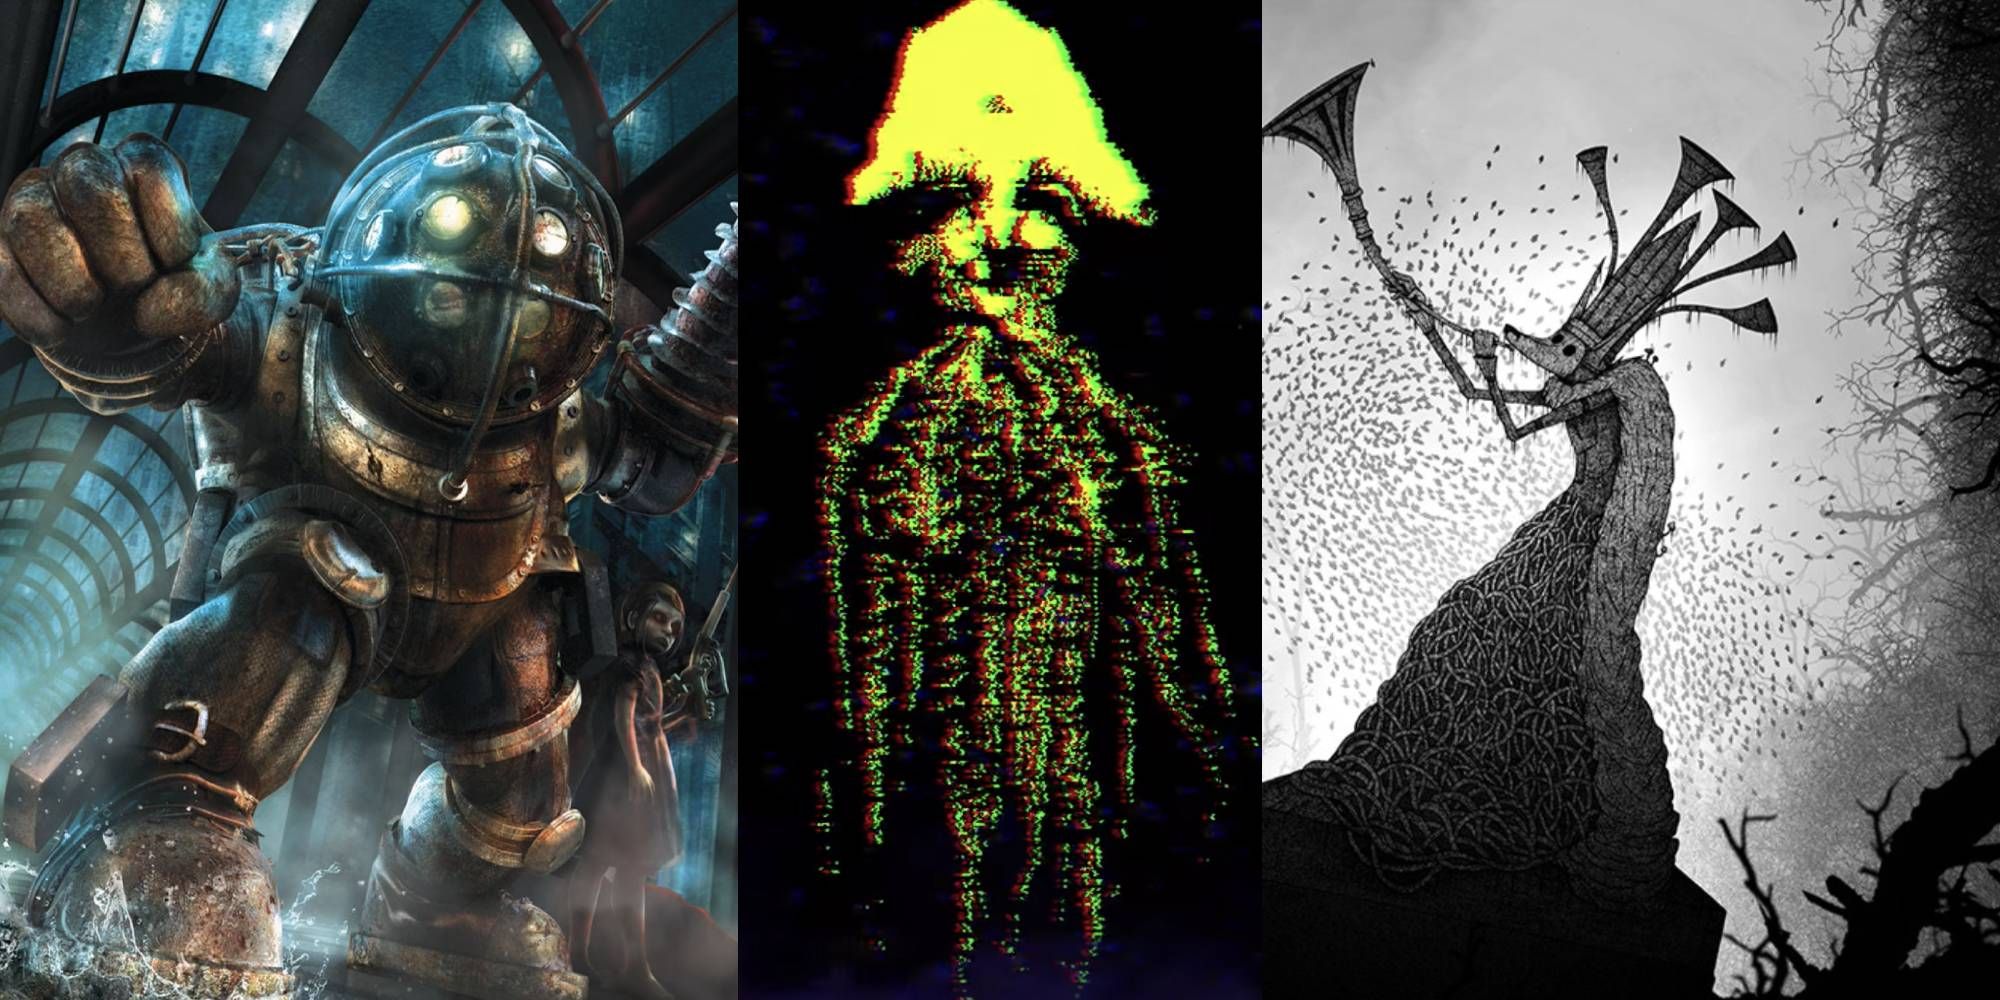 The 2021 Horror and Survival Horror games that deserve your